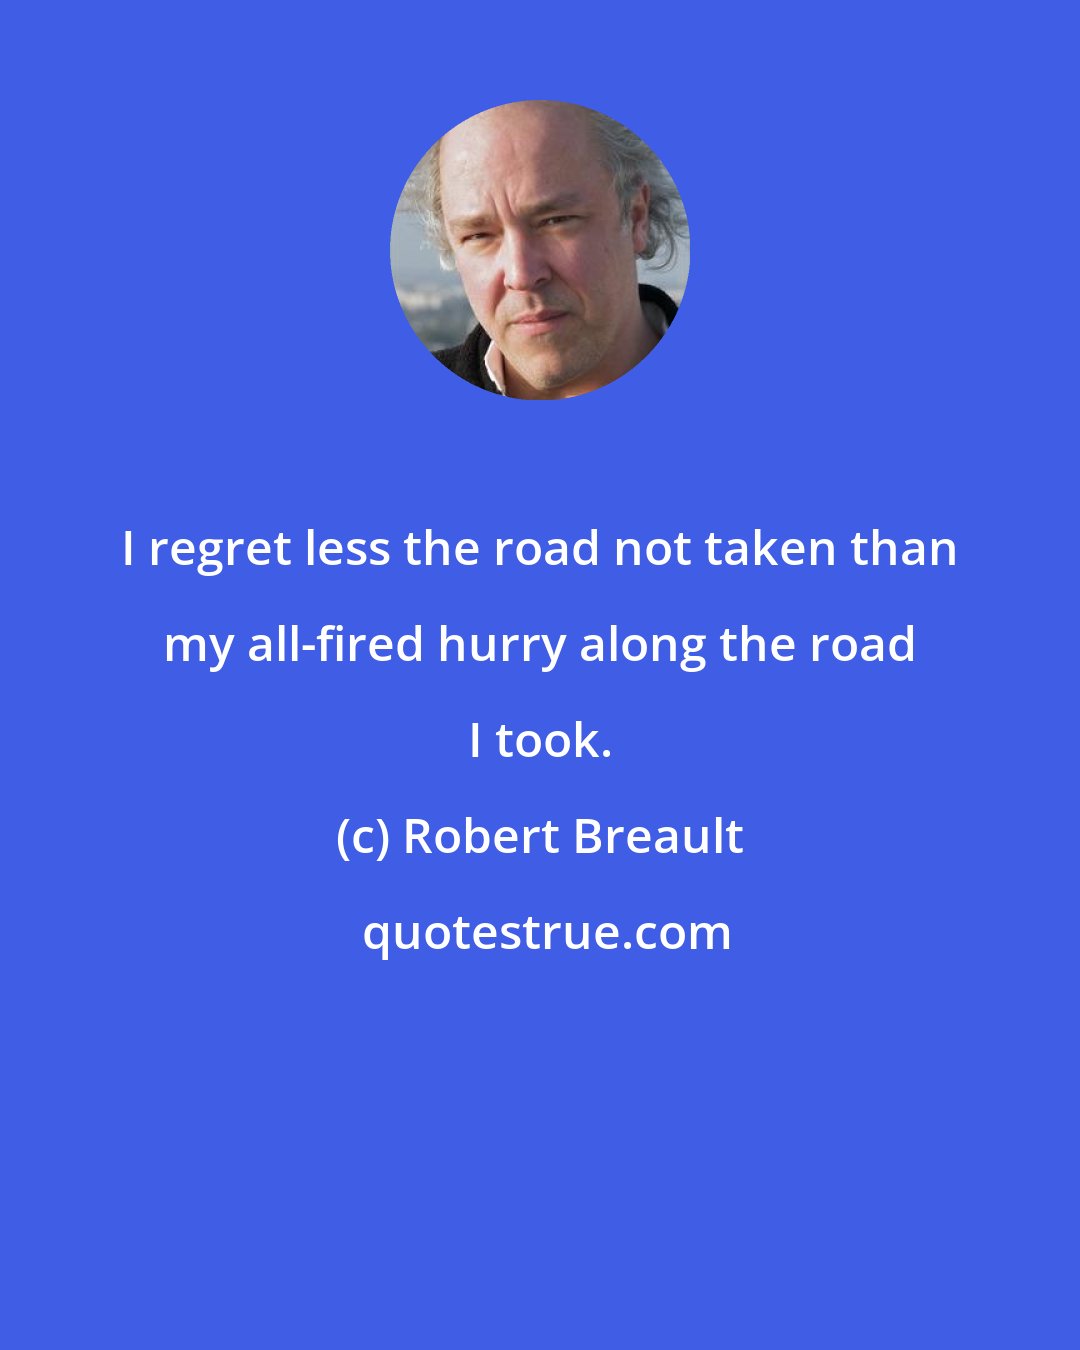 Robert Breault: I regret less the road not taken than my all-fired hurry along the road I took.